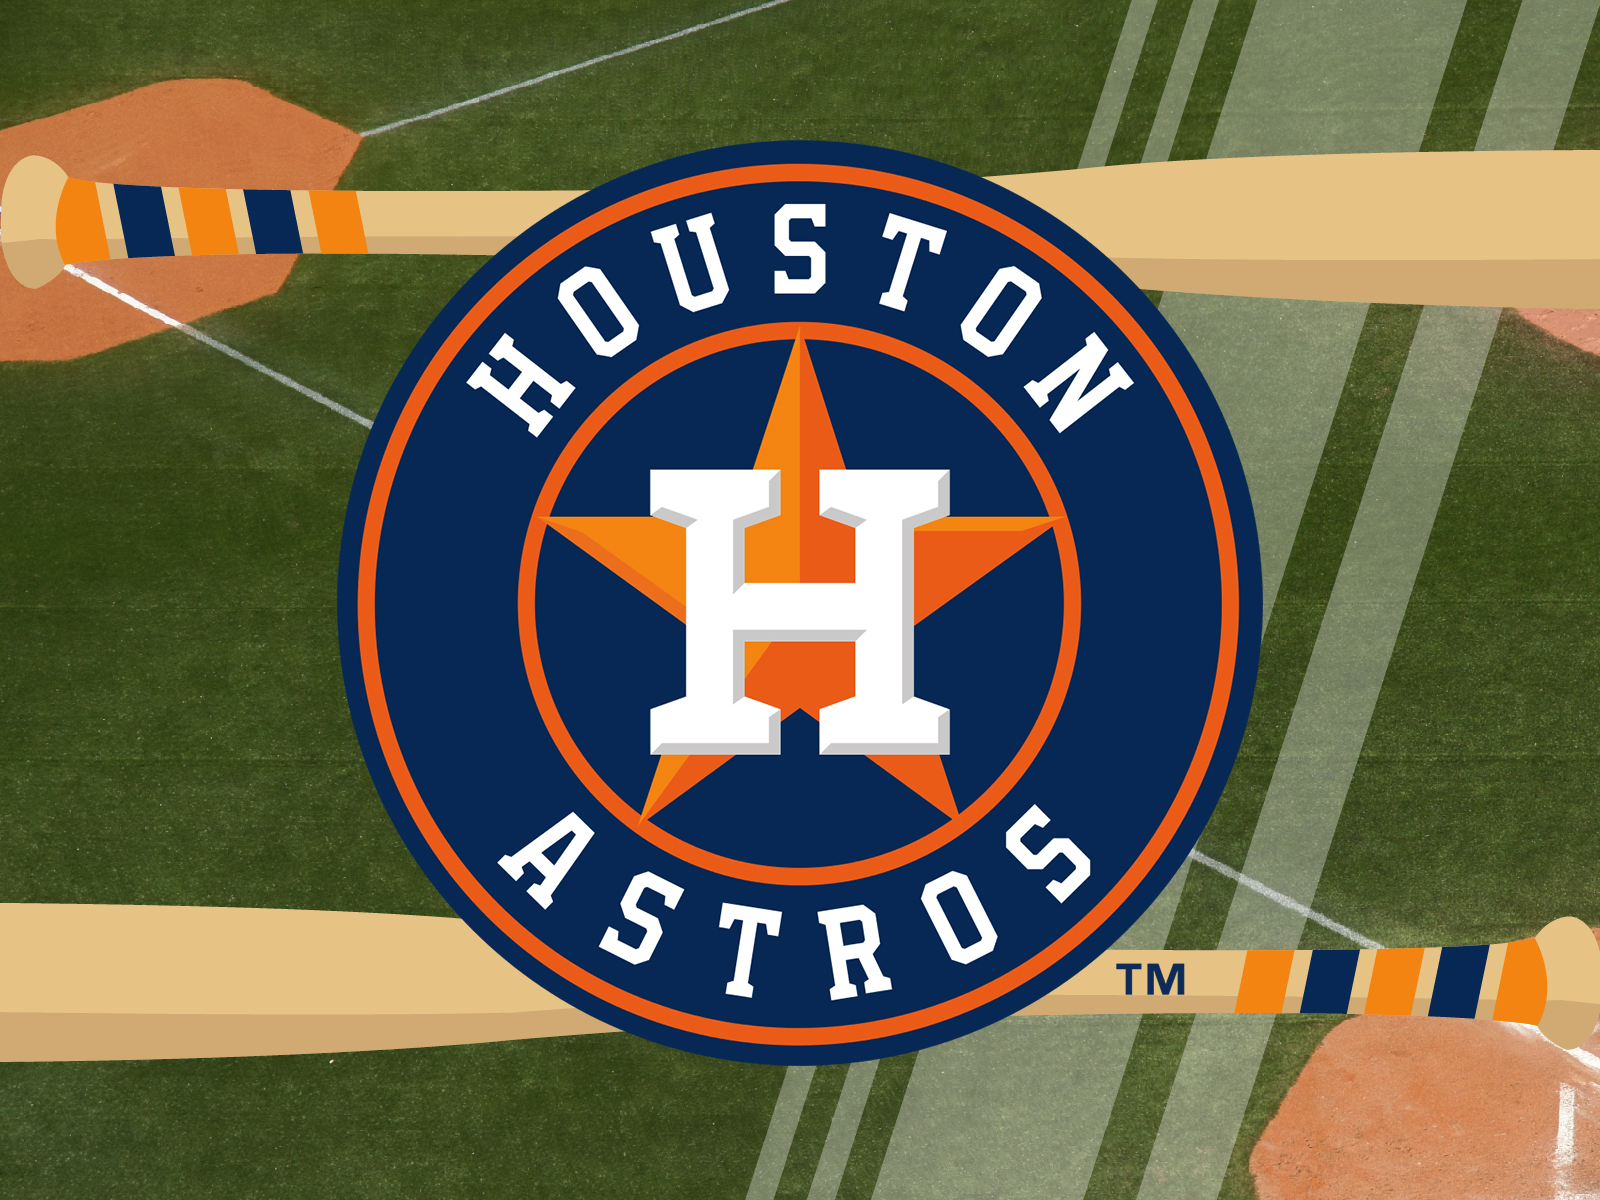 GRAPHIC: The Houston Astros logo is pictured with baseball bats and a baseball field in the background. Graphic created by The Signal online editor, Krista Kamp.